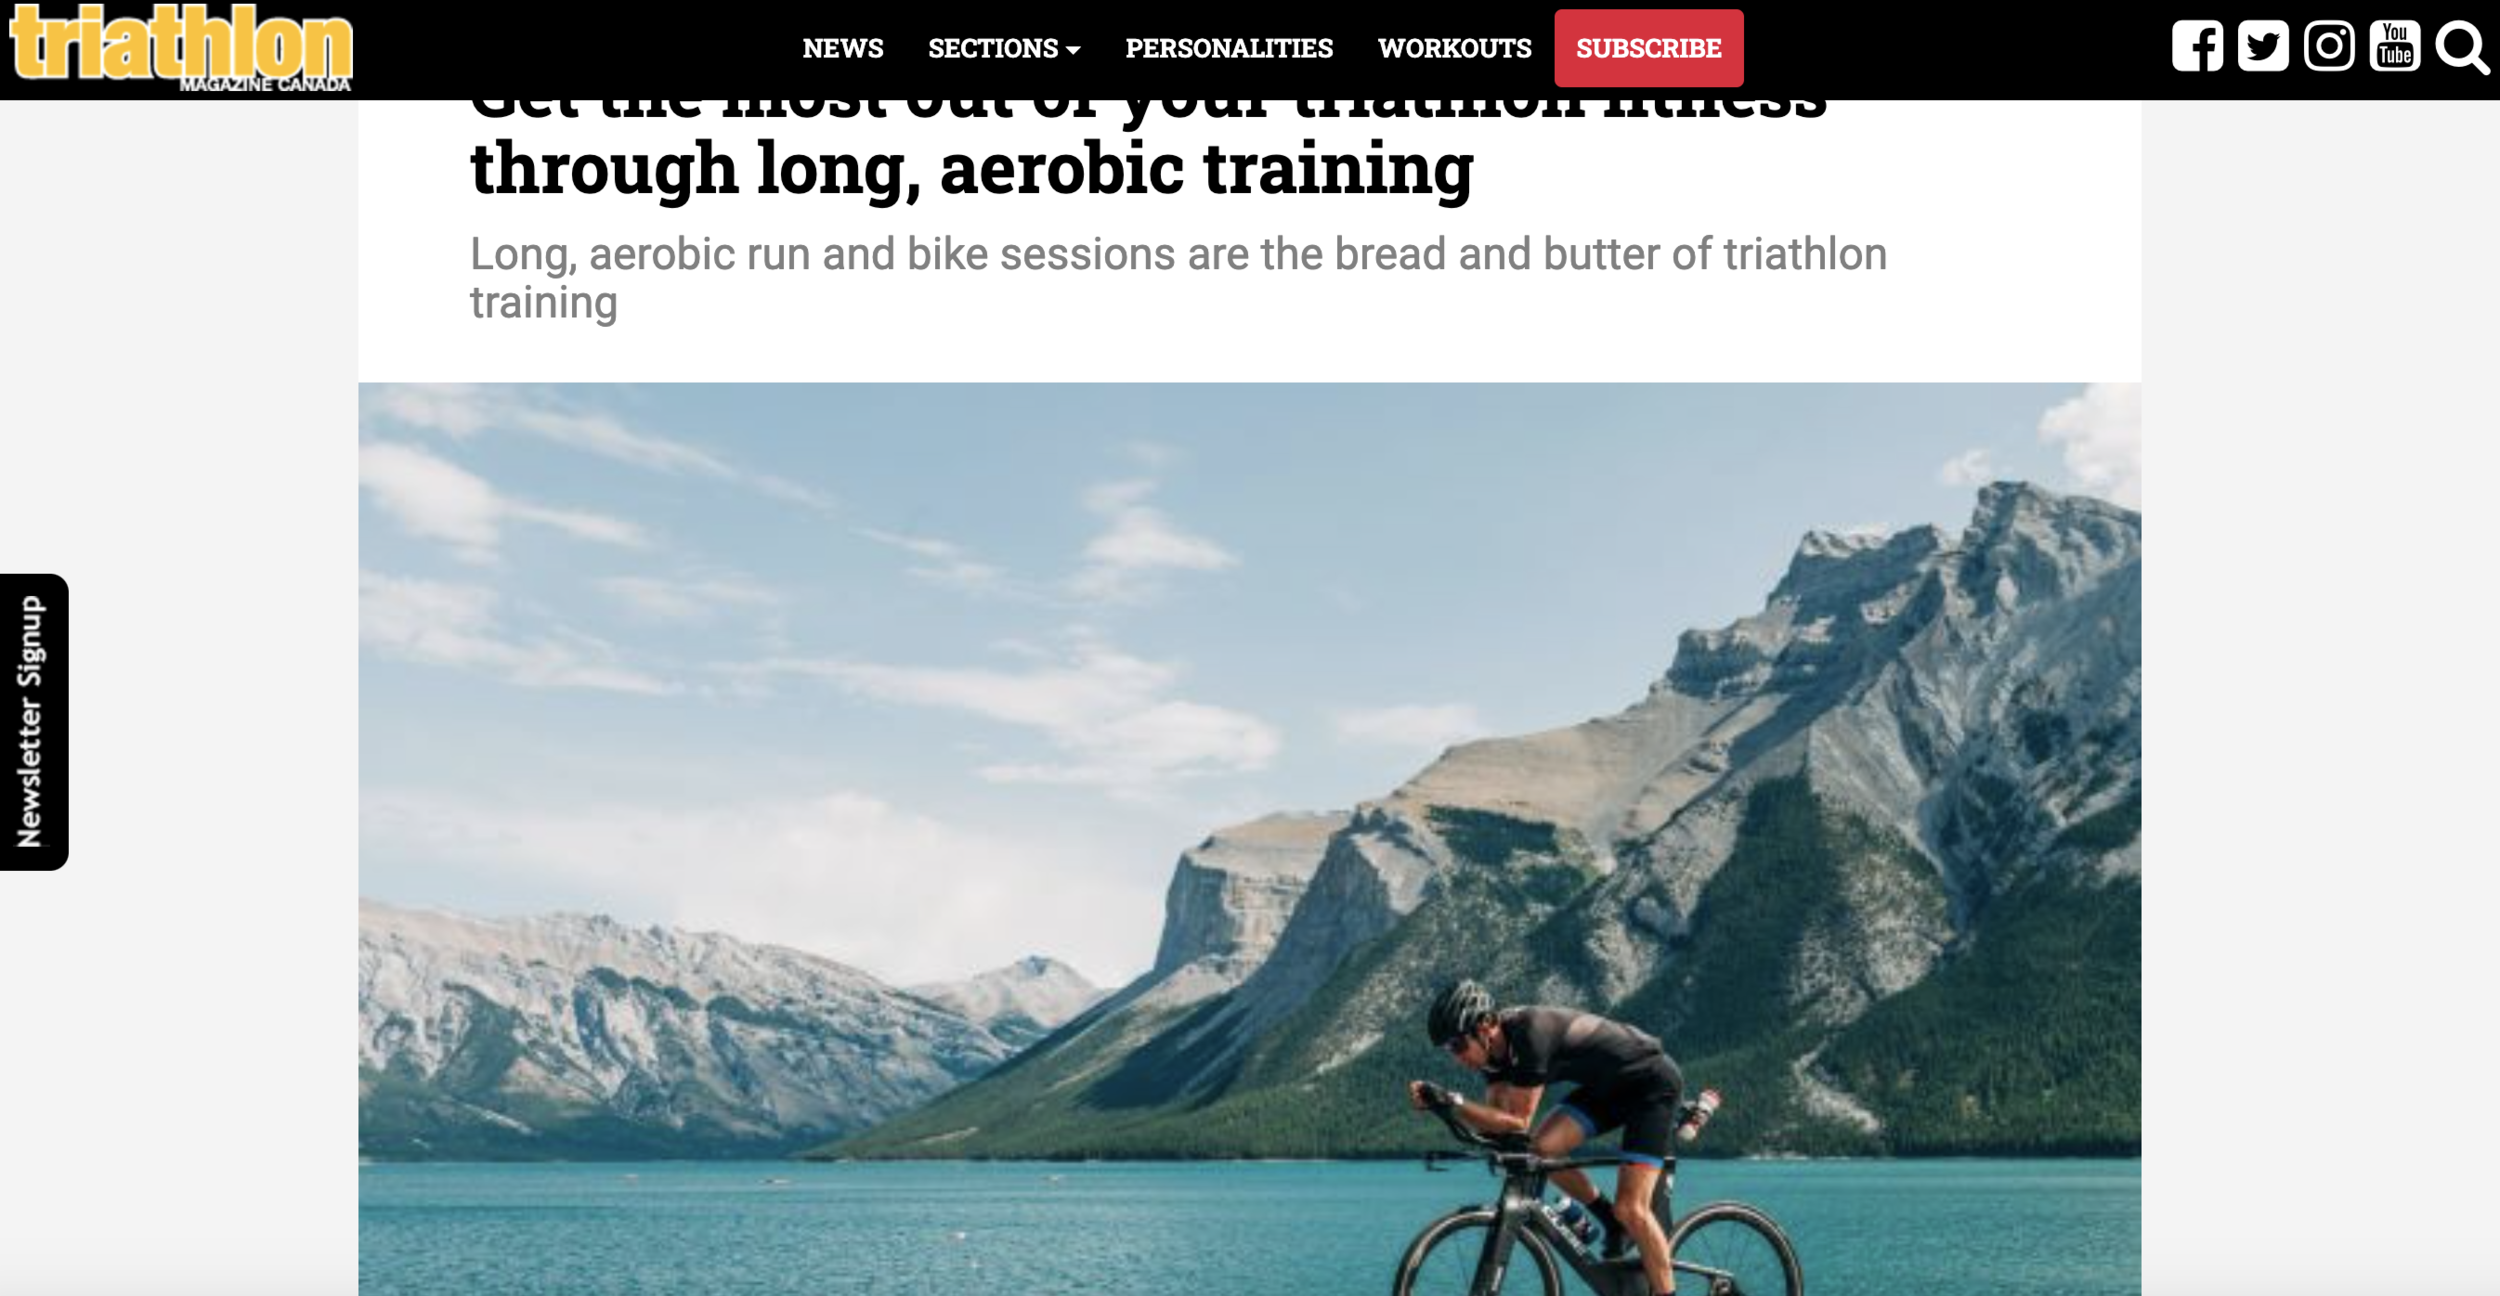 Get the most out of your triathlon fitness through long, aerobic training